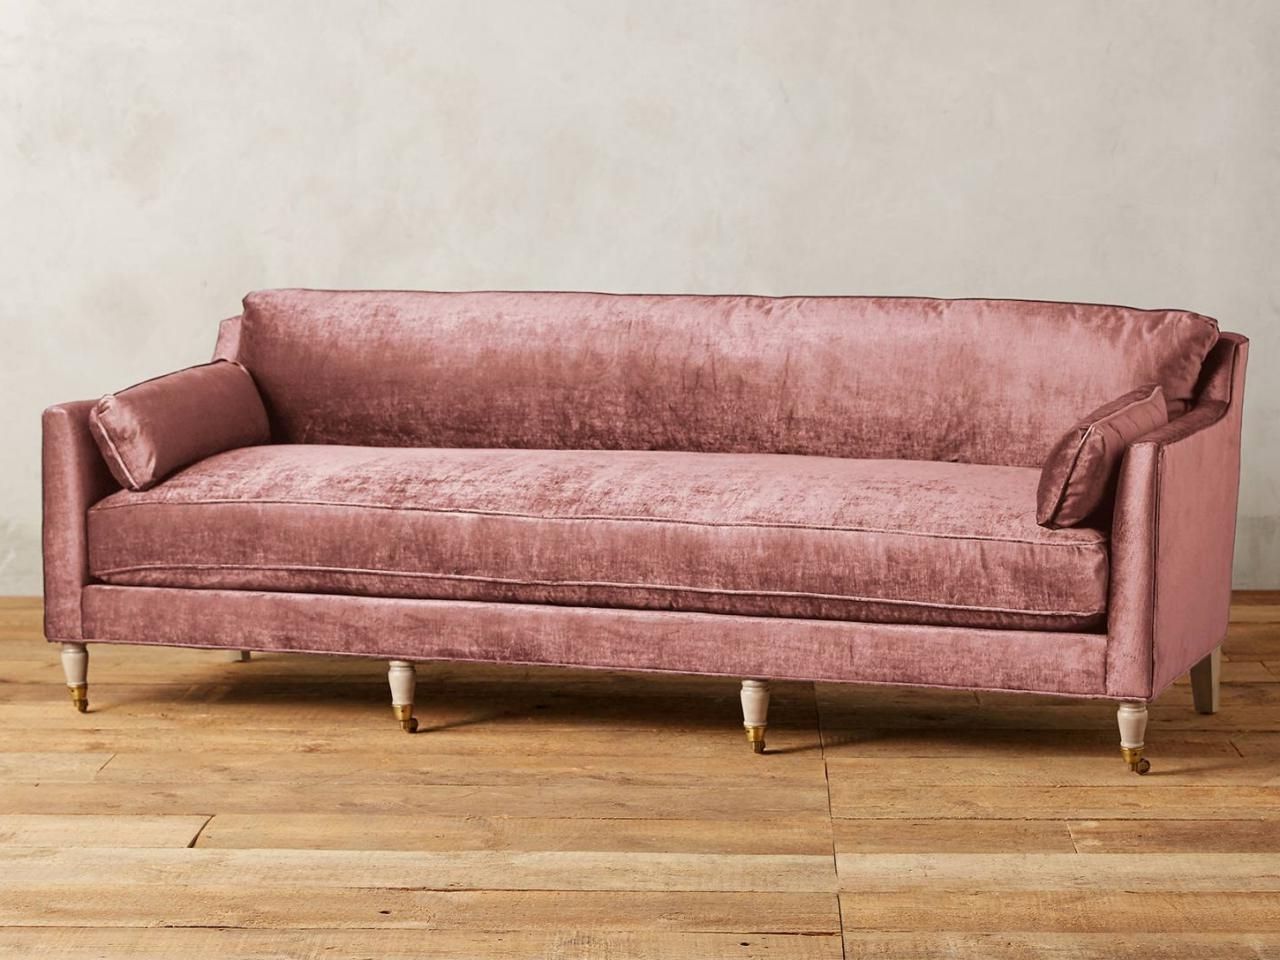 Velvet Sofas Regarding Best And Newest 11 Of The Best Velvet Sofas To Decorate With (View 3 of 15)